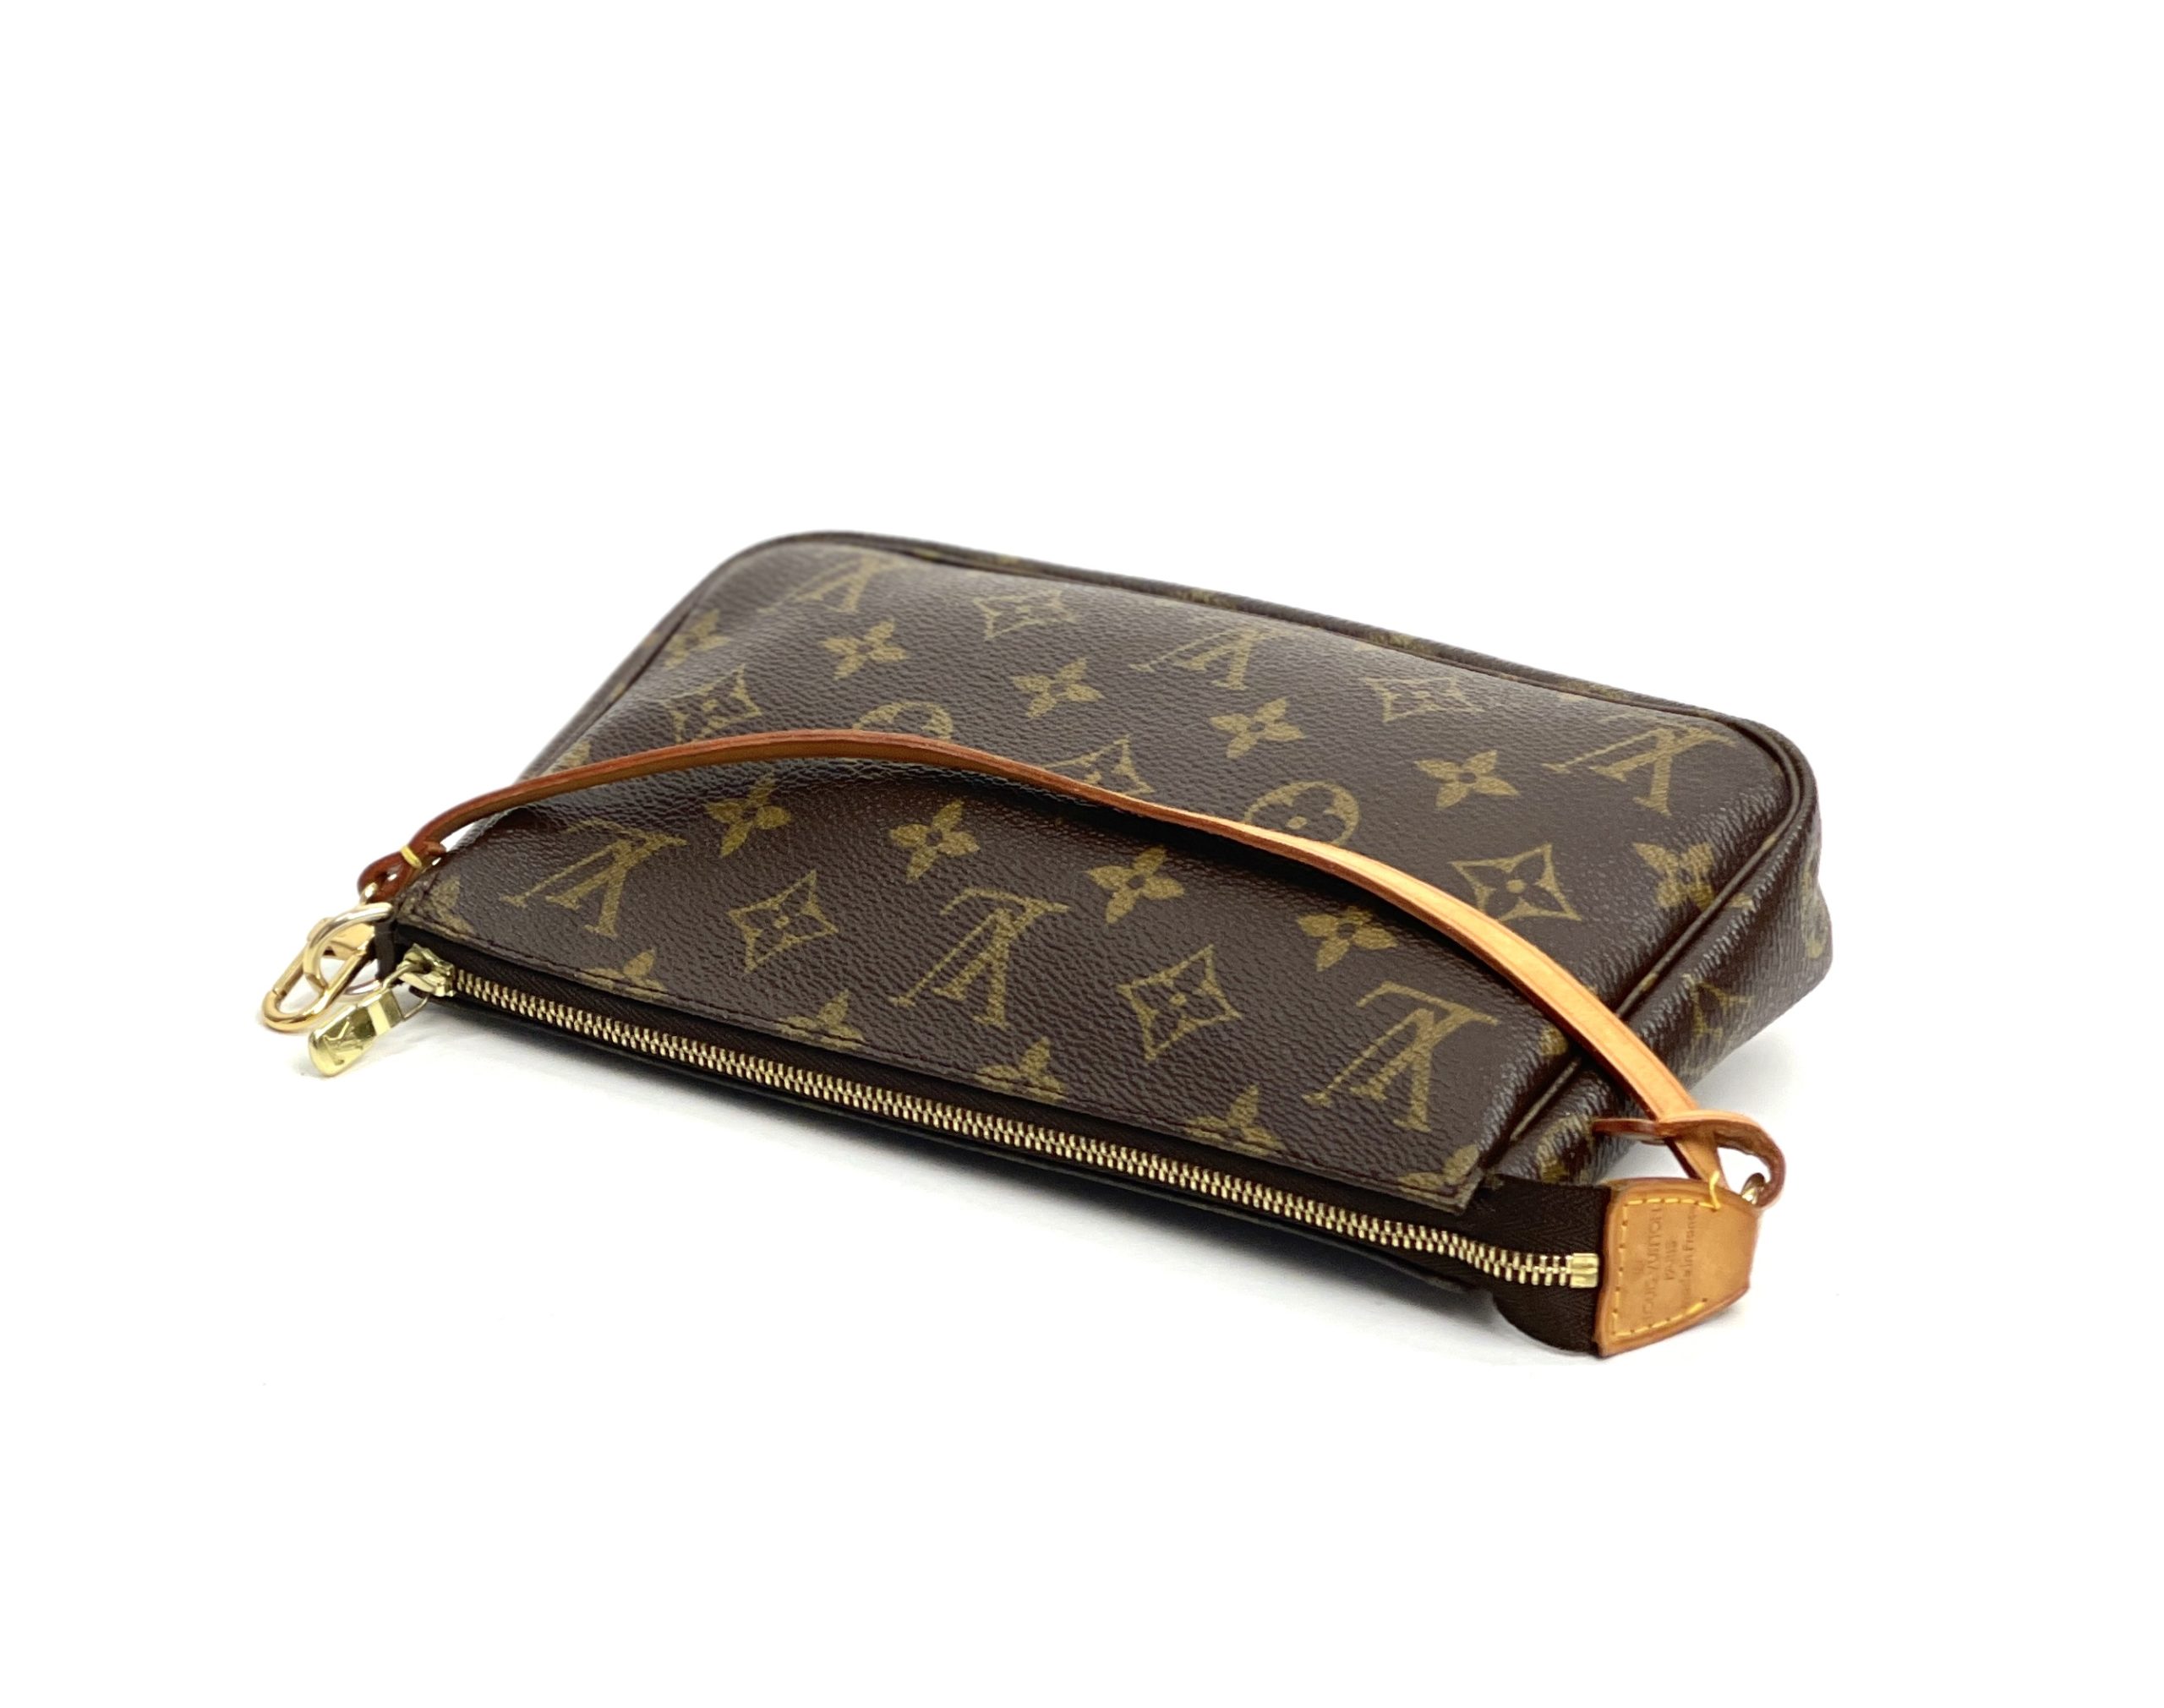 Louis Vuitton Pochette Accessories Stephen Sprouse Roses Monogram  Brown/Pink/Orange in Canvas with Gold-tone - US